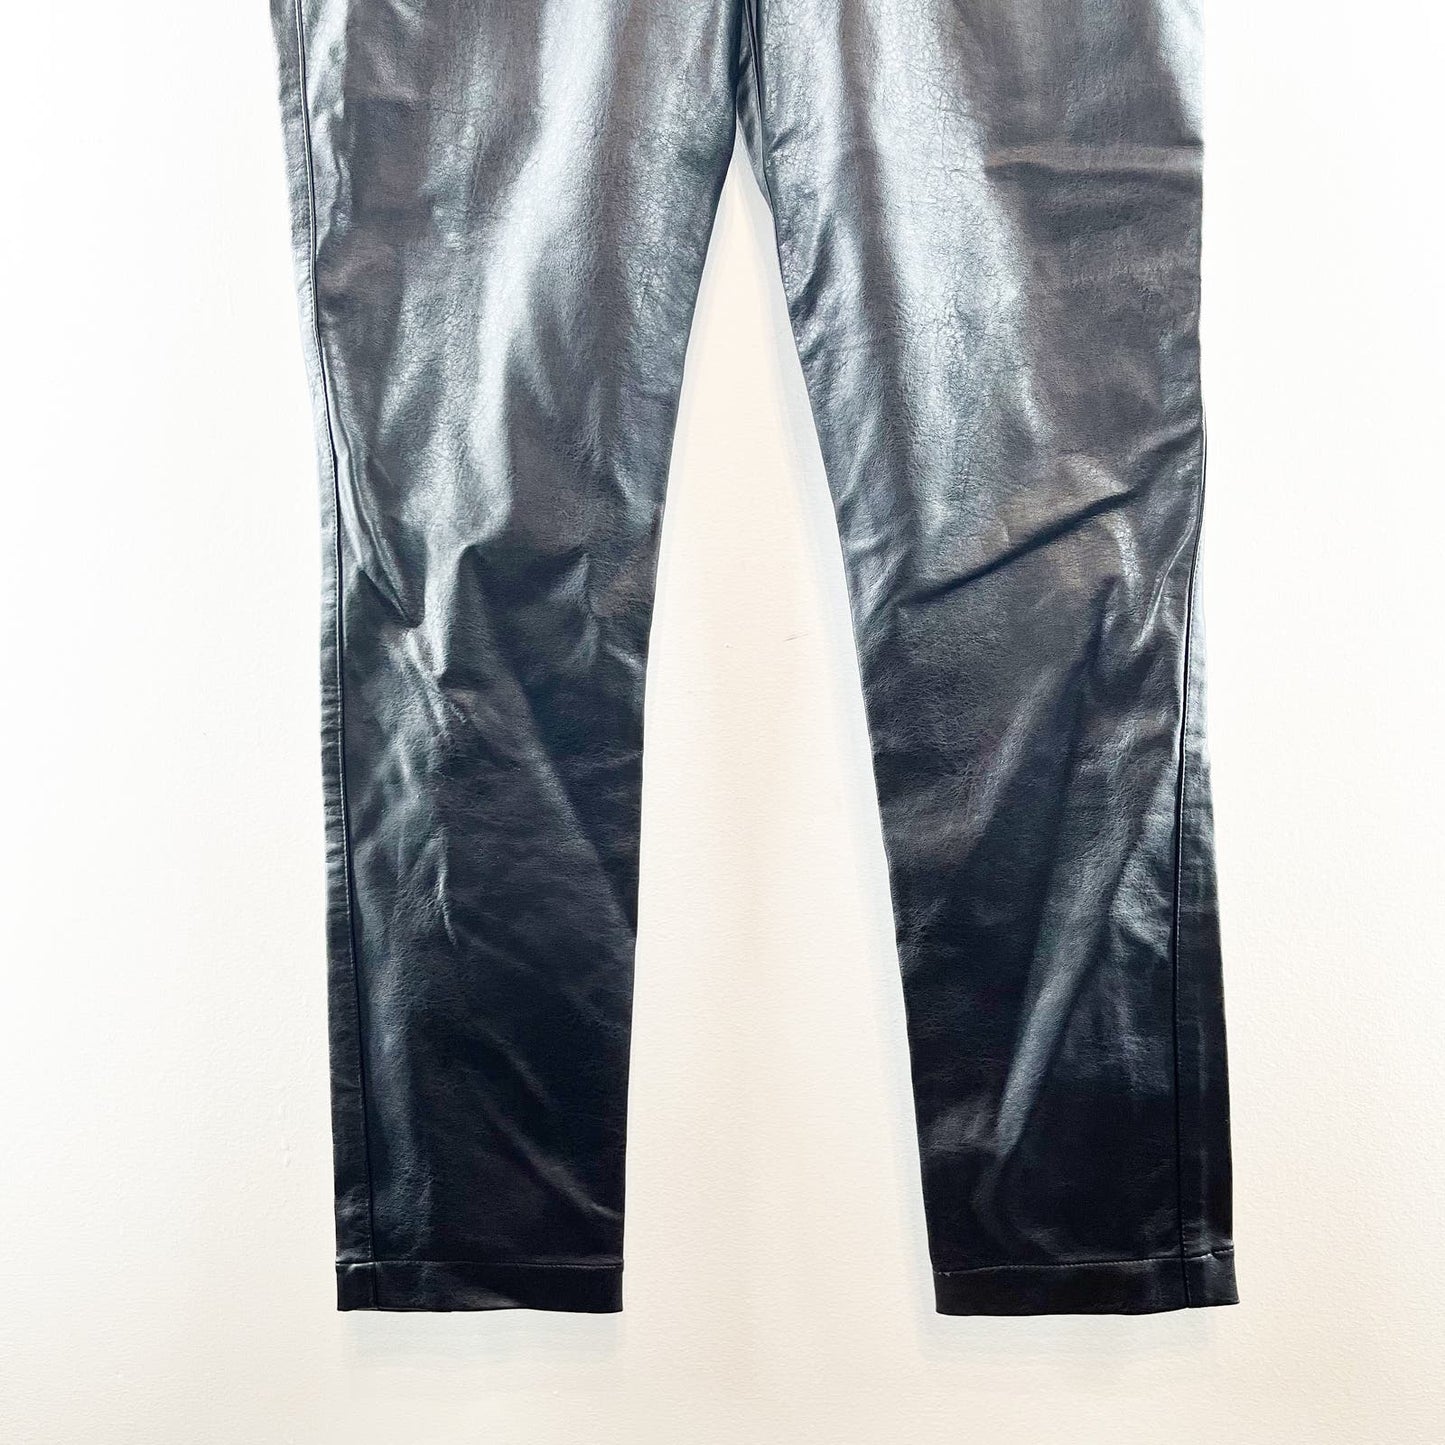 Urban Outfitters Western Faux Leather High Rise Skinny Jeans Pants Black 6